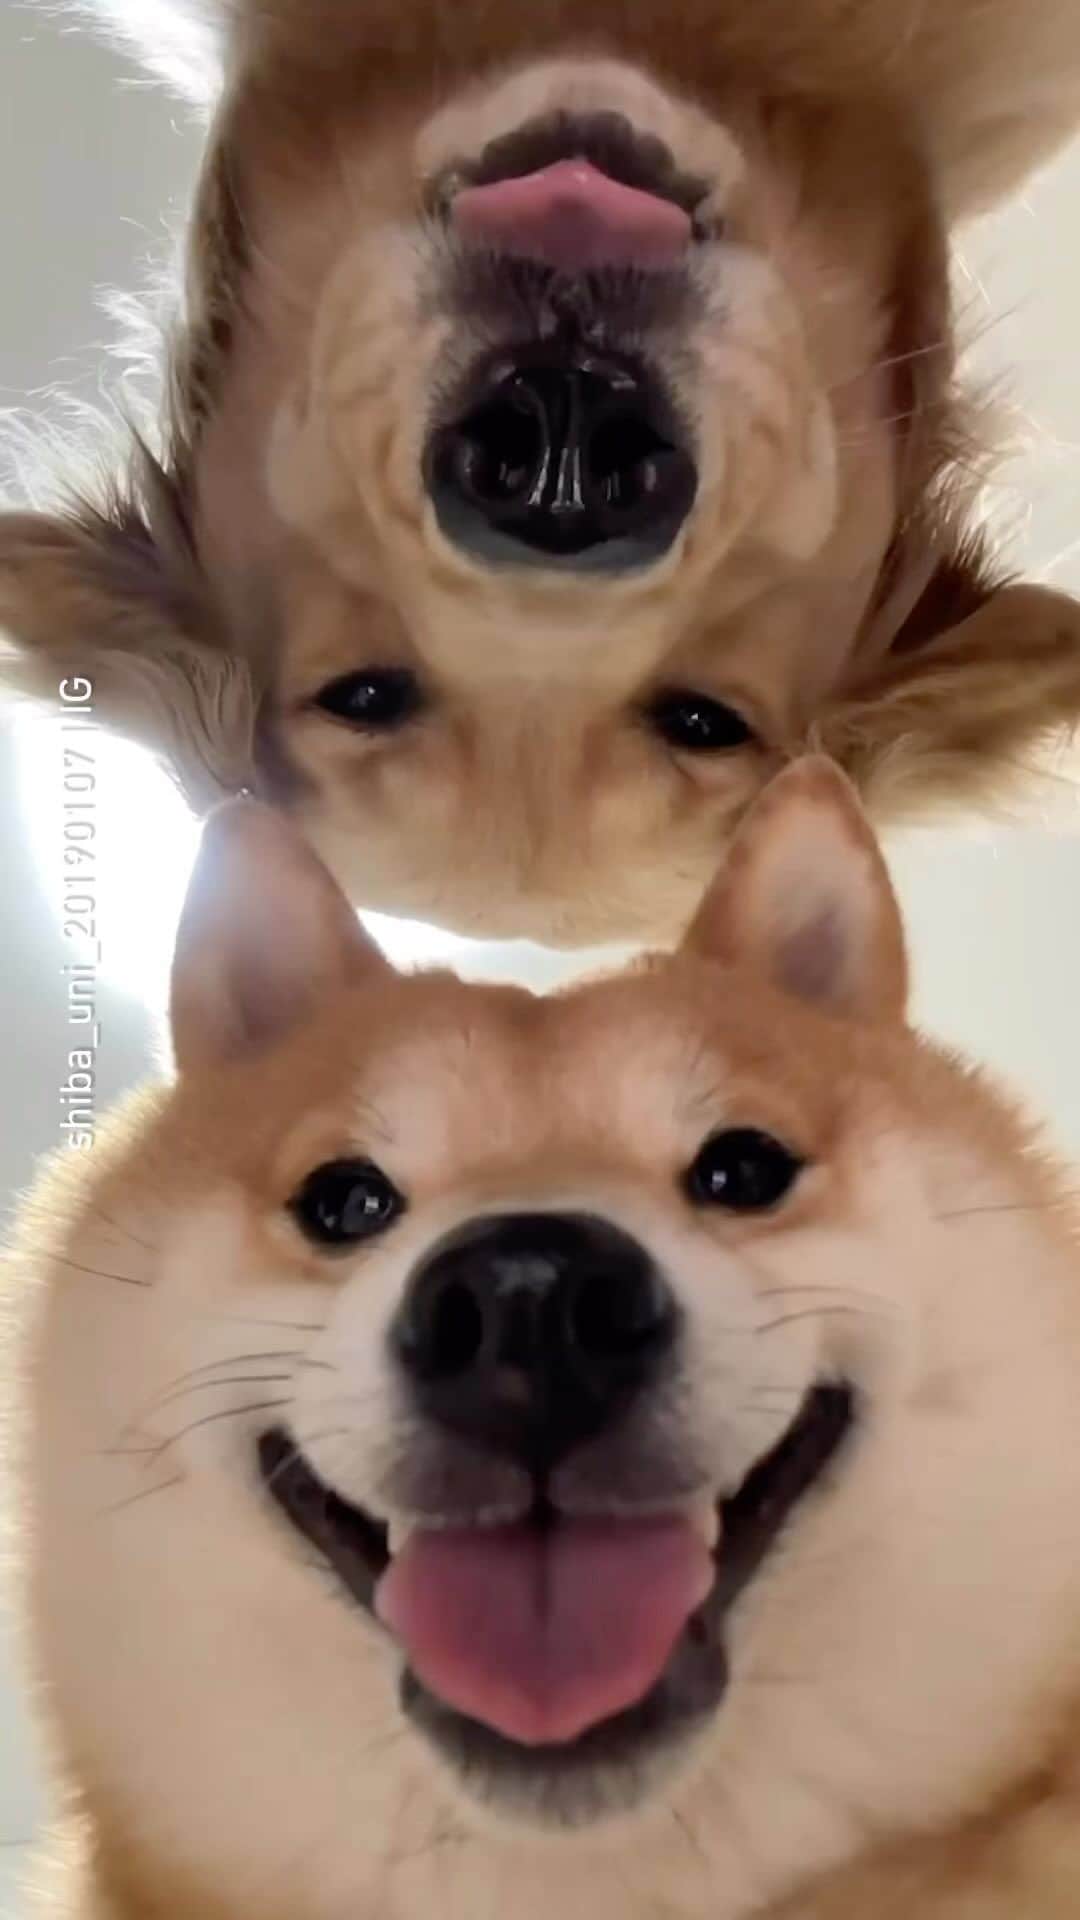 8crapのインスタグラム：「Front camera double chin never look so adorable 📹 @shiba_uni_20190107 - Hashtag #barkedselfie on your doggo’s selfies and get a chance to be featured! - #barked #Selfie #DogSelfie #dog #doggo #GoldenRetriever #ShibaInu #Shiba」